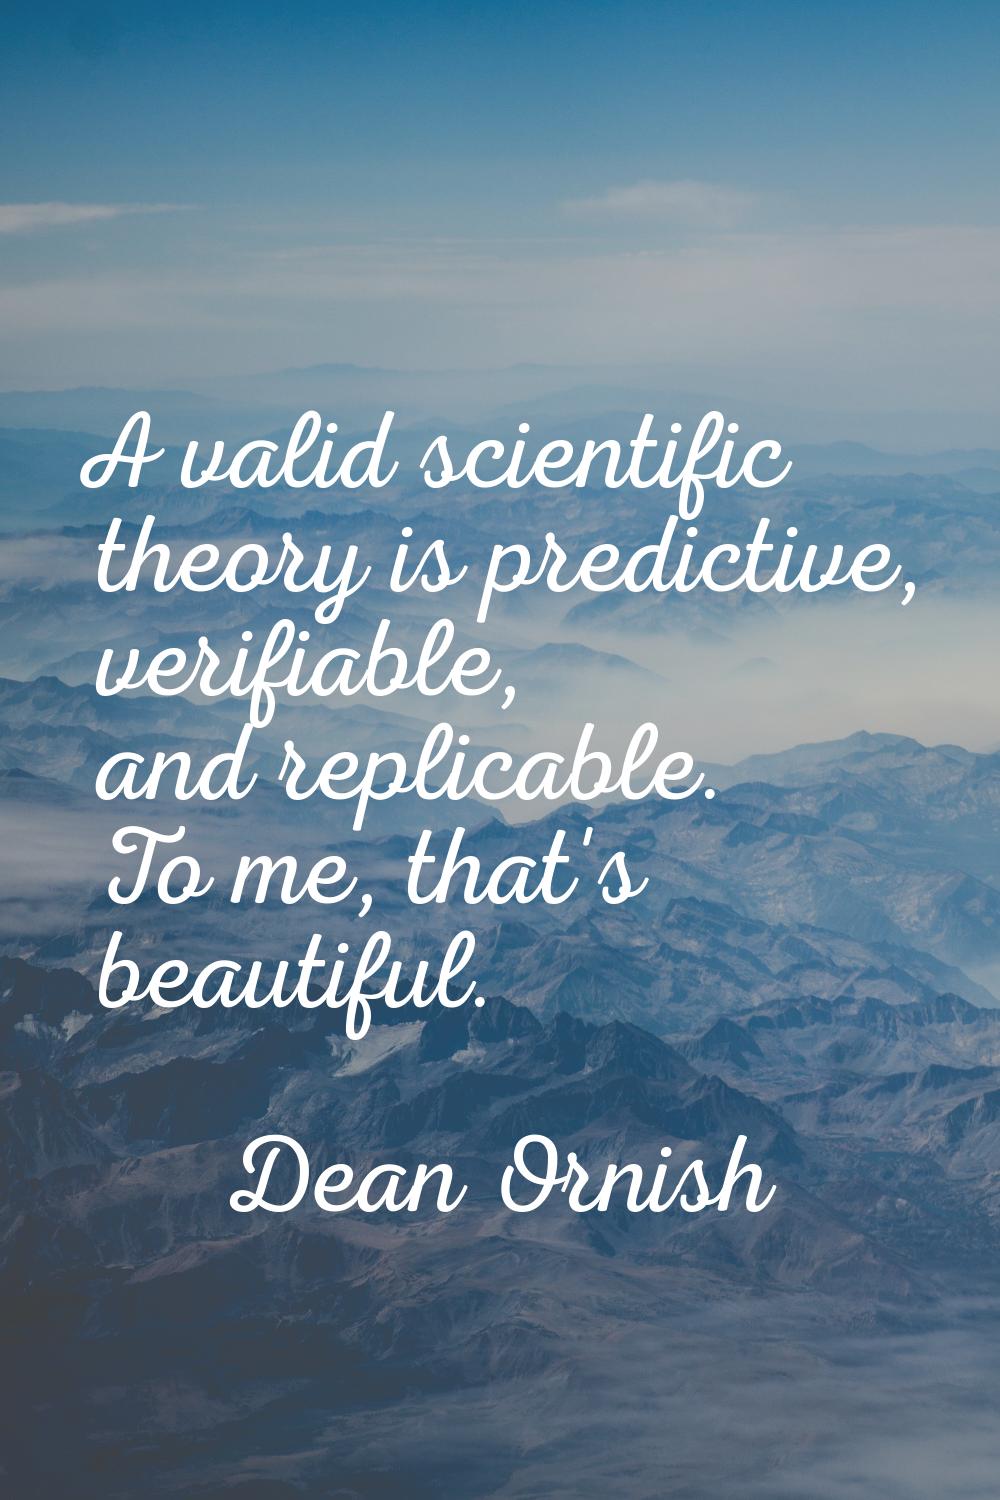 A valid scientific theory is predictive, verifiable, and replicable. To me, that's beautiful.